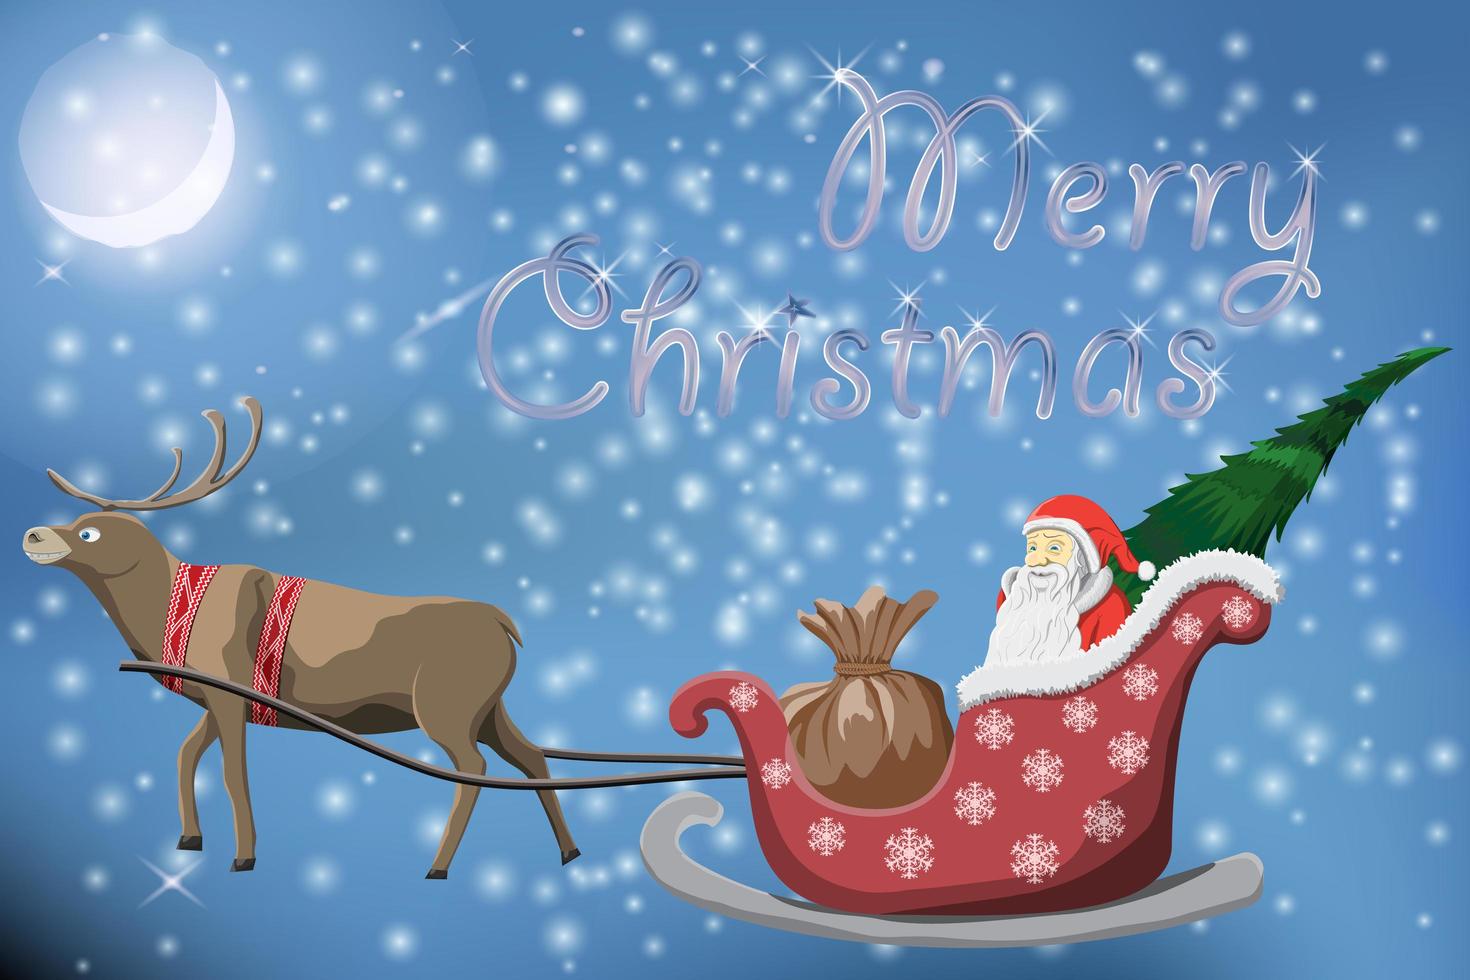 Merry Christmas post card with flying Santa Claus vector